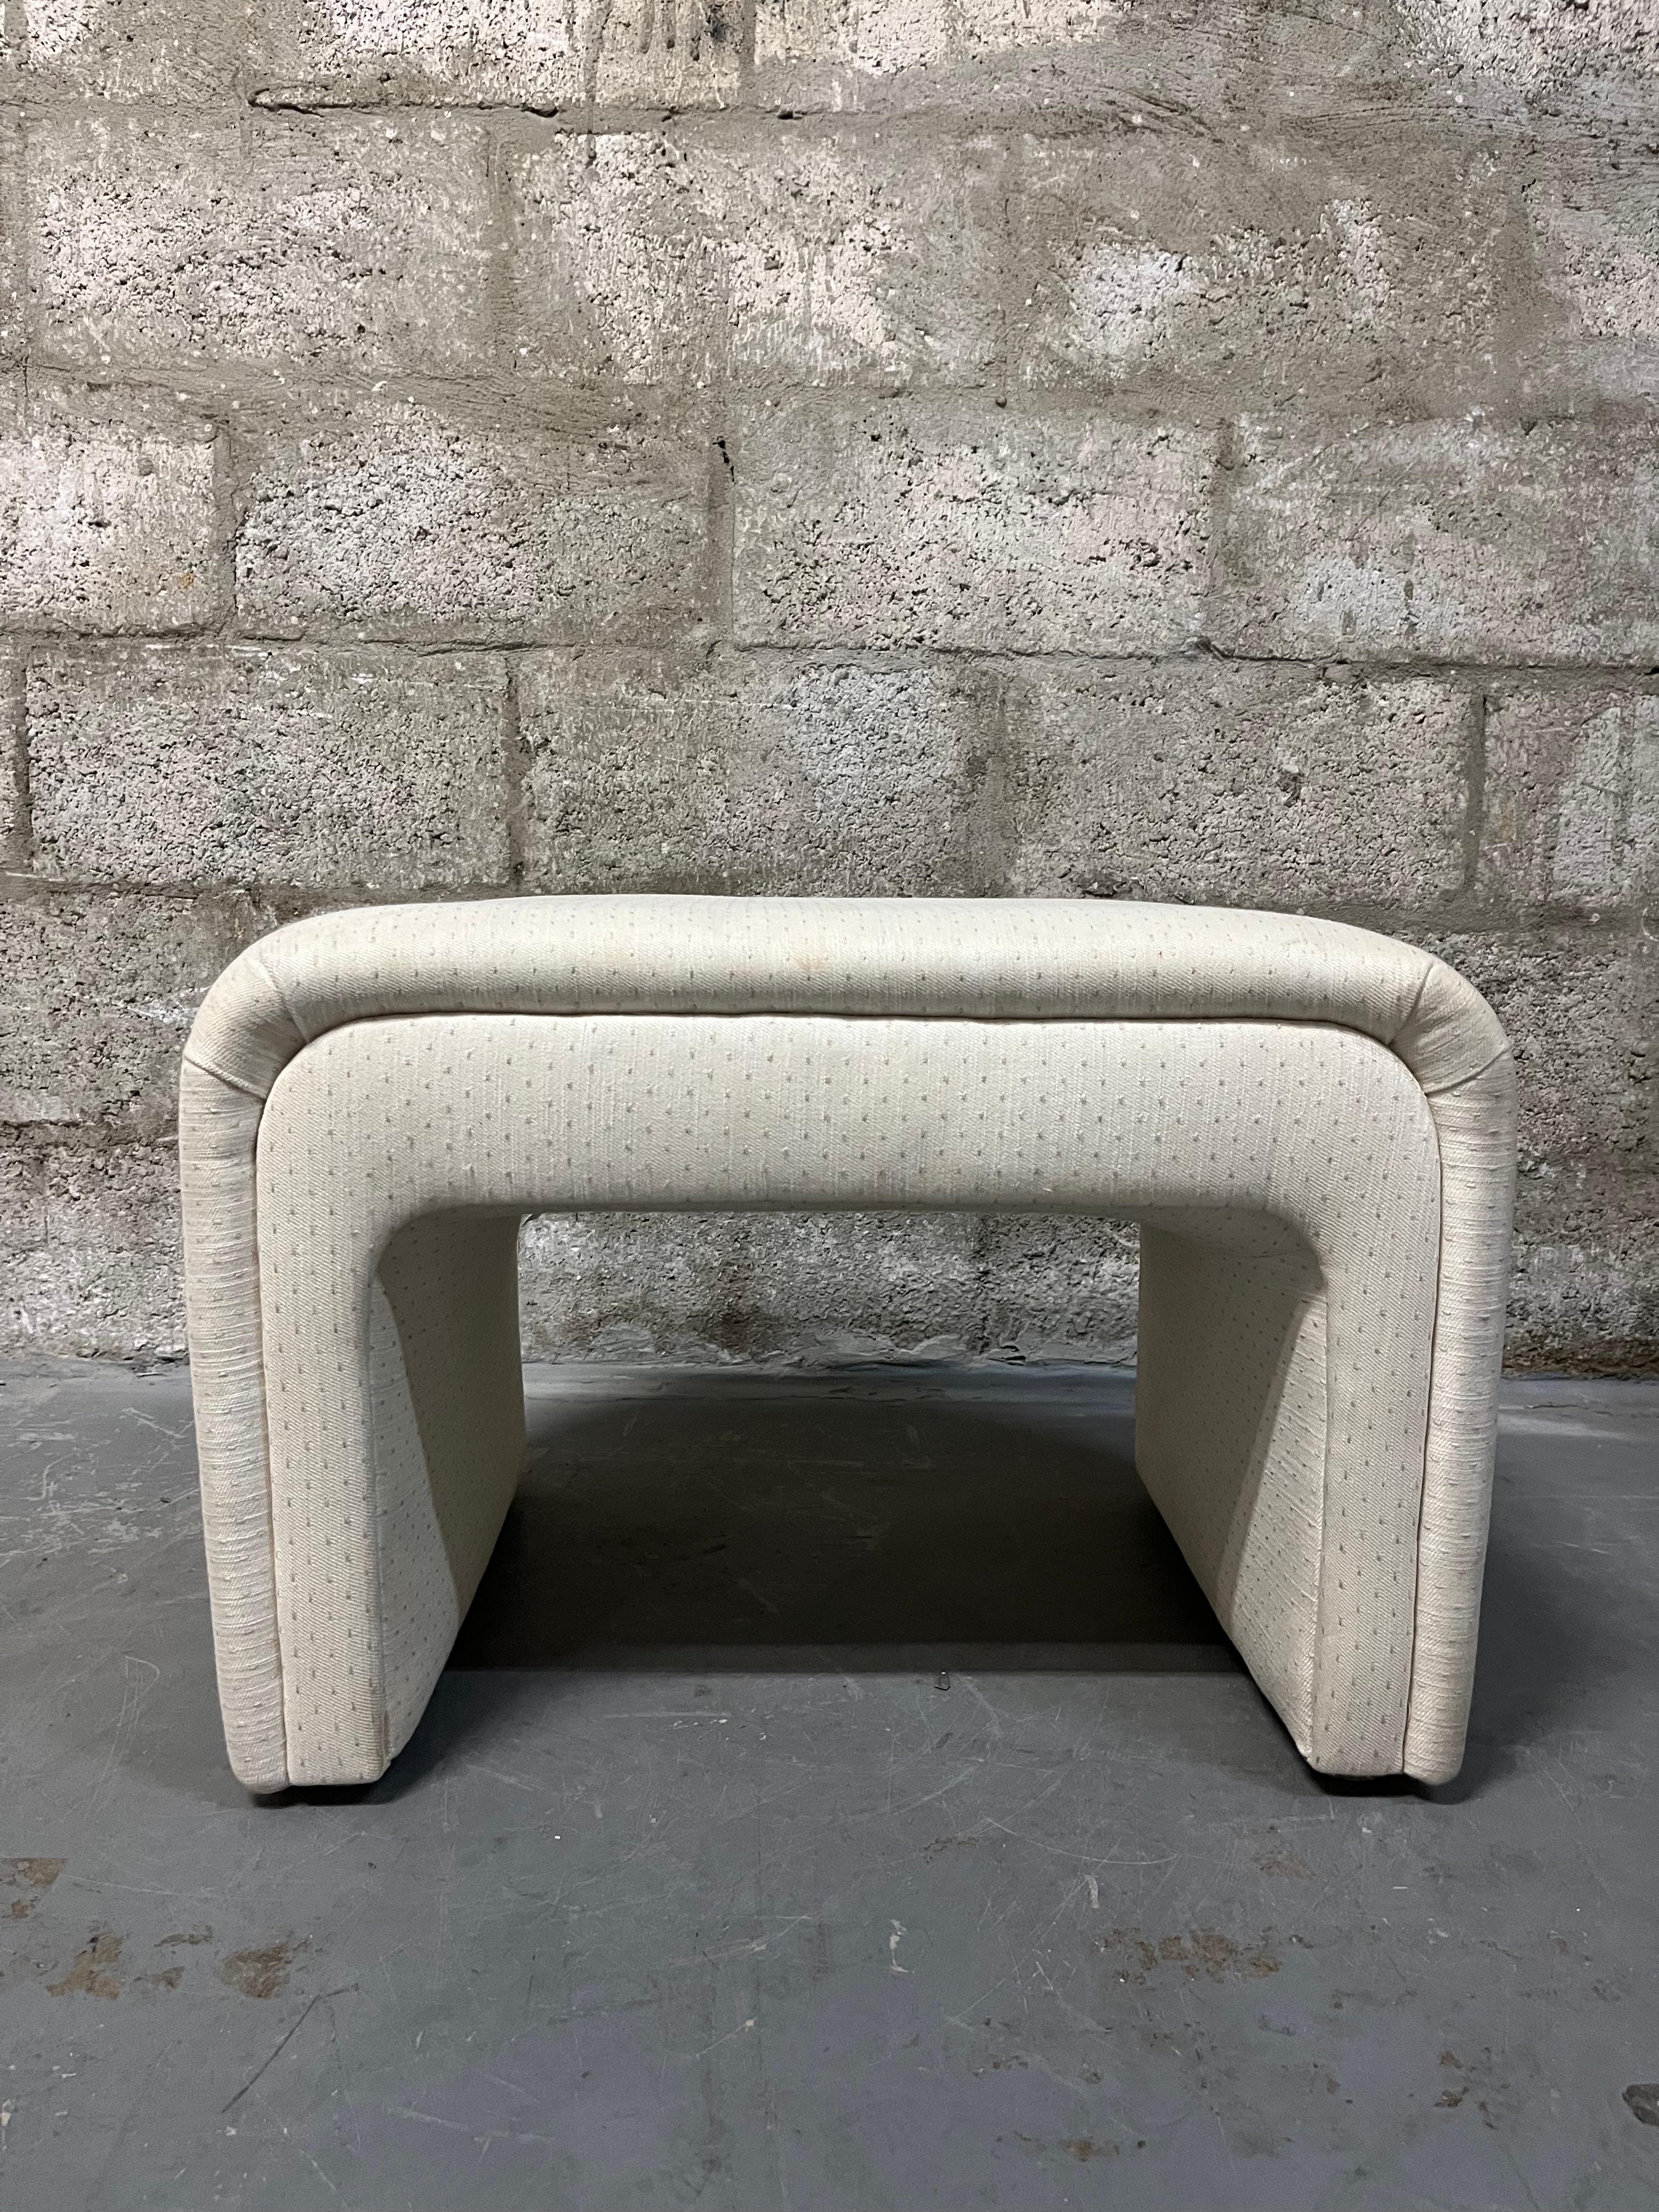 Art Deco Revival Upholstered Waterfall Bench by Thayer Coggin. Circa 1980s  For Sale 1